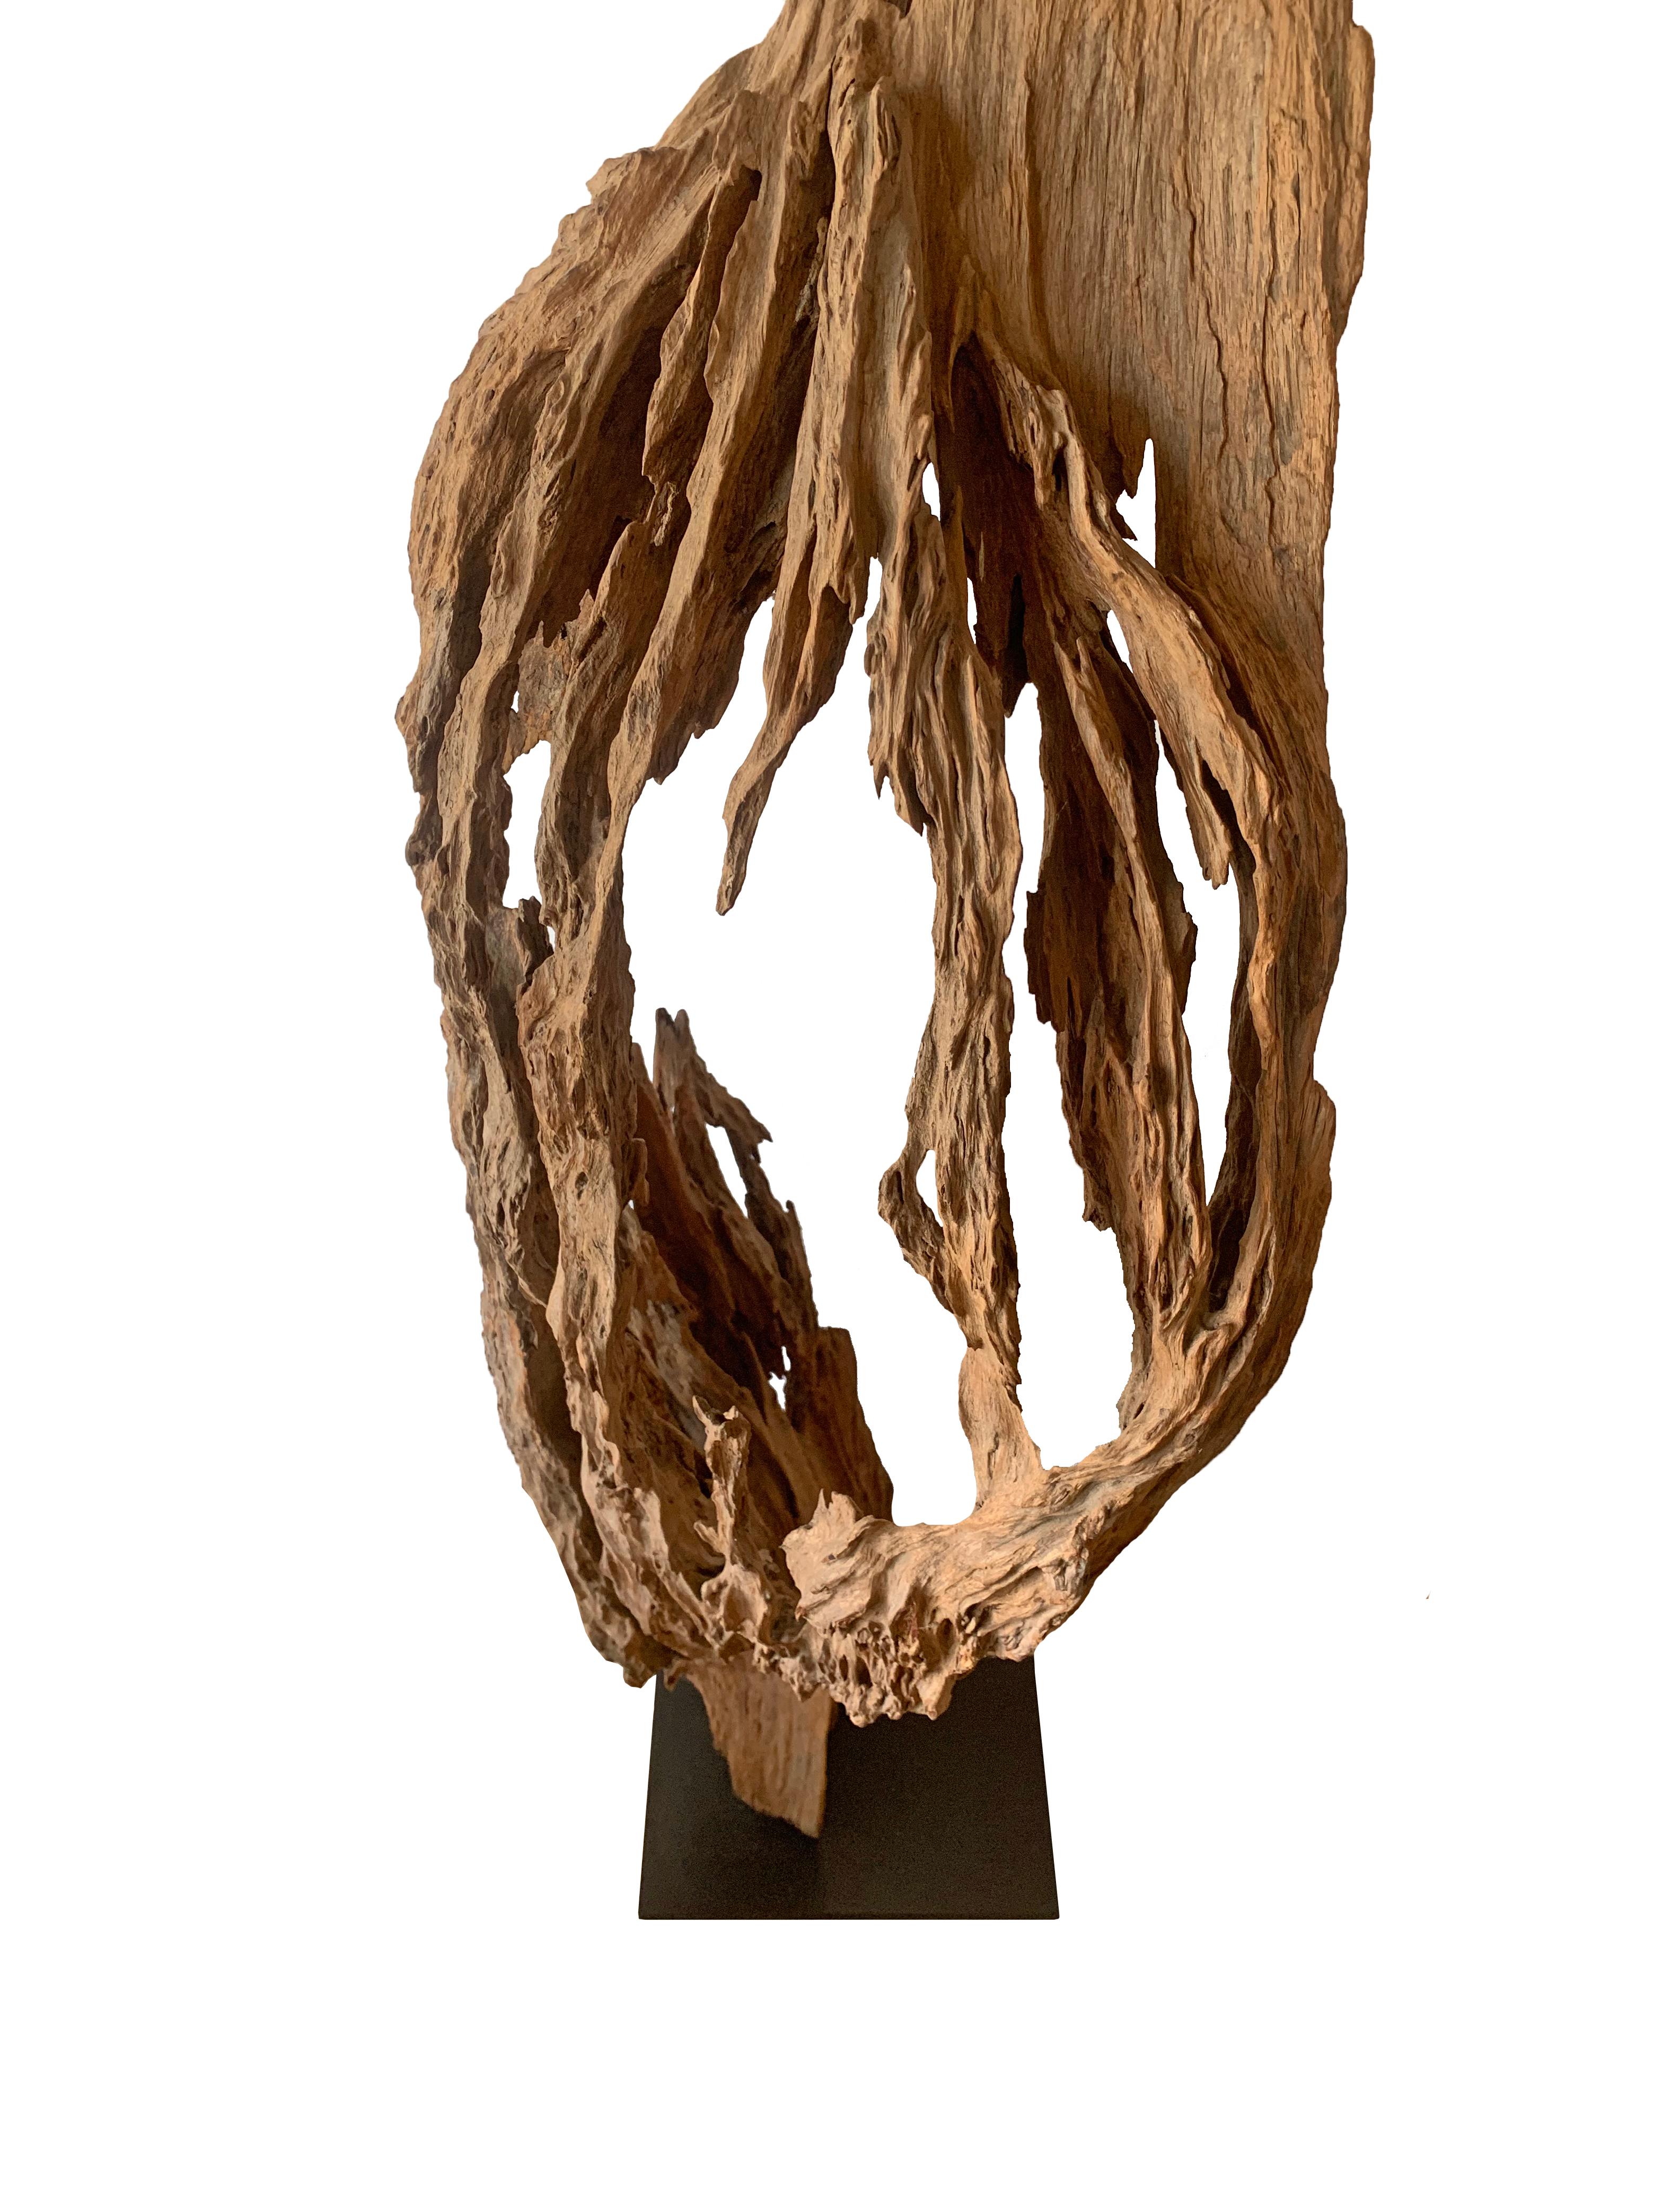 Eroded Teak Tree Skeleton Sculpture on Stand, Late 20th Century For Sale 1